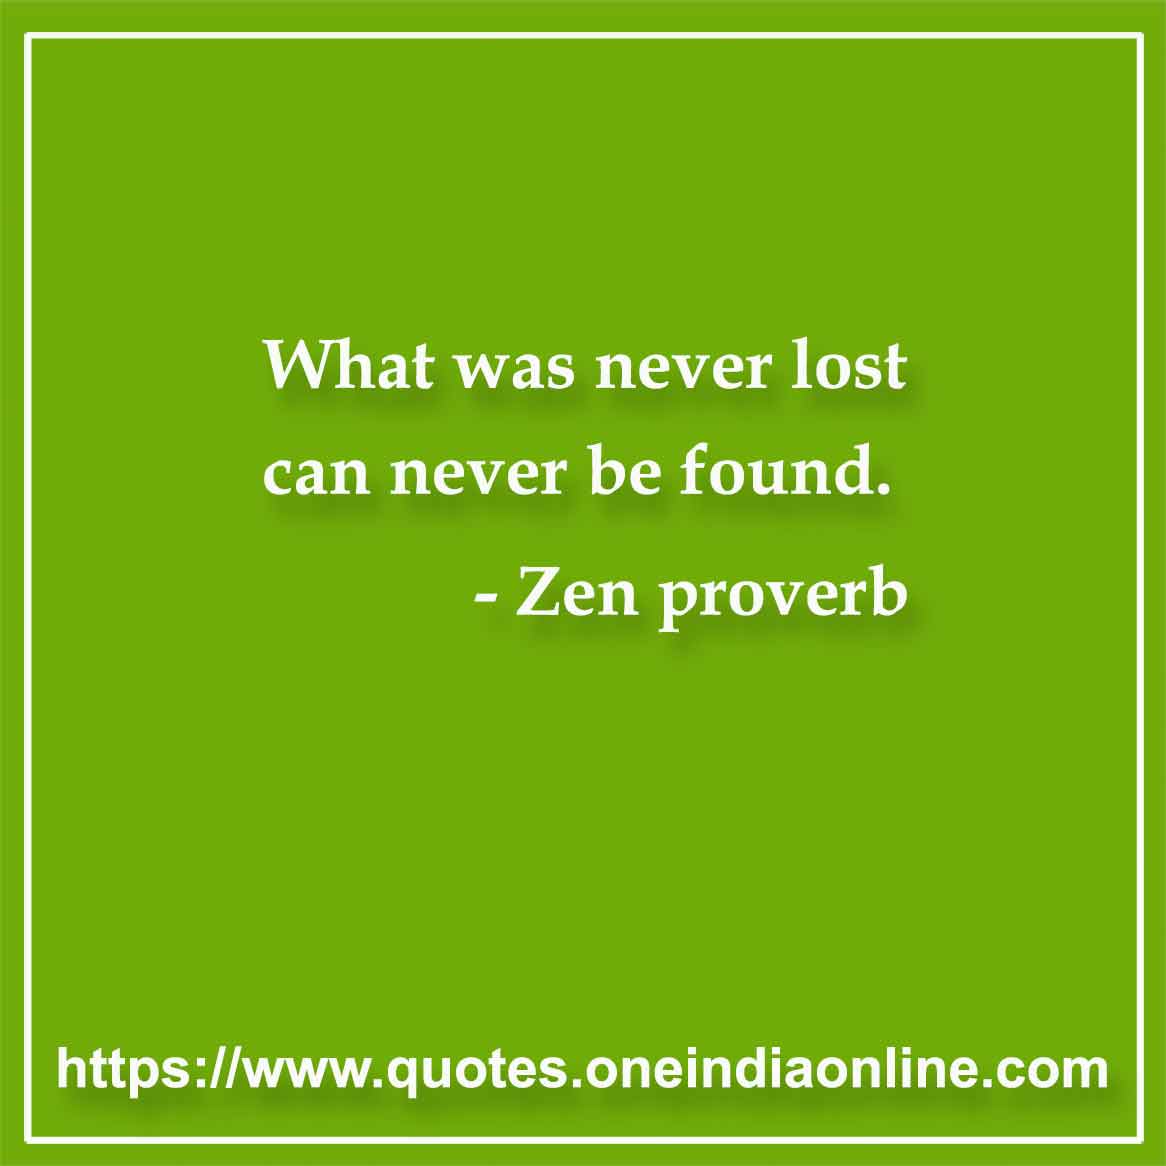 What was never lost can never be found. 
